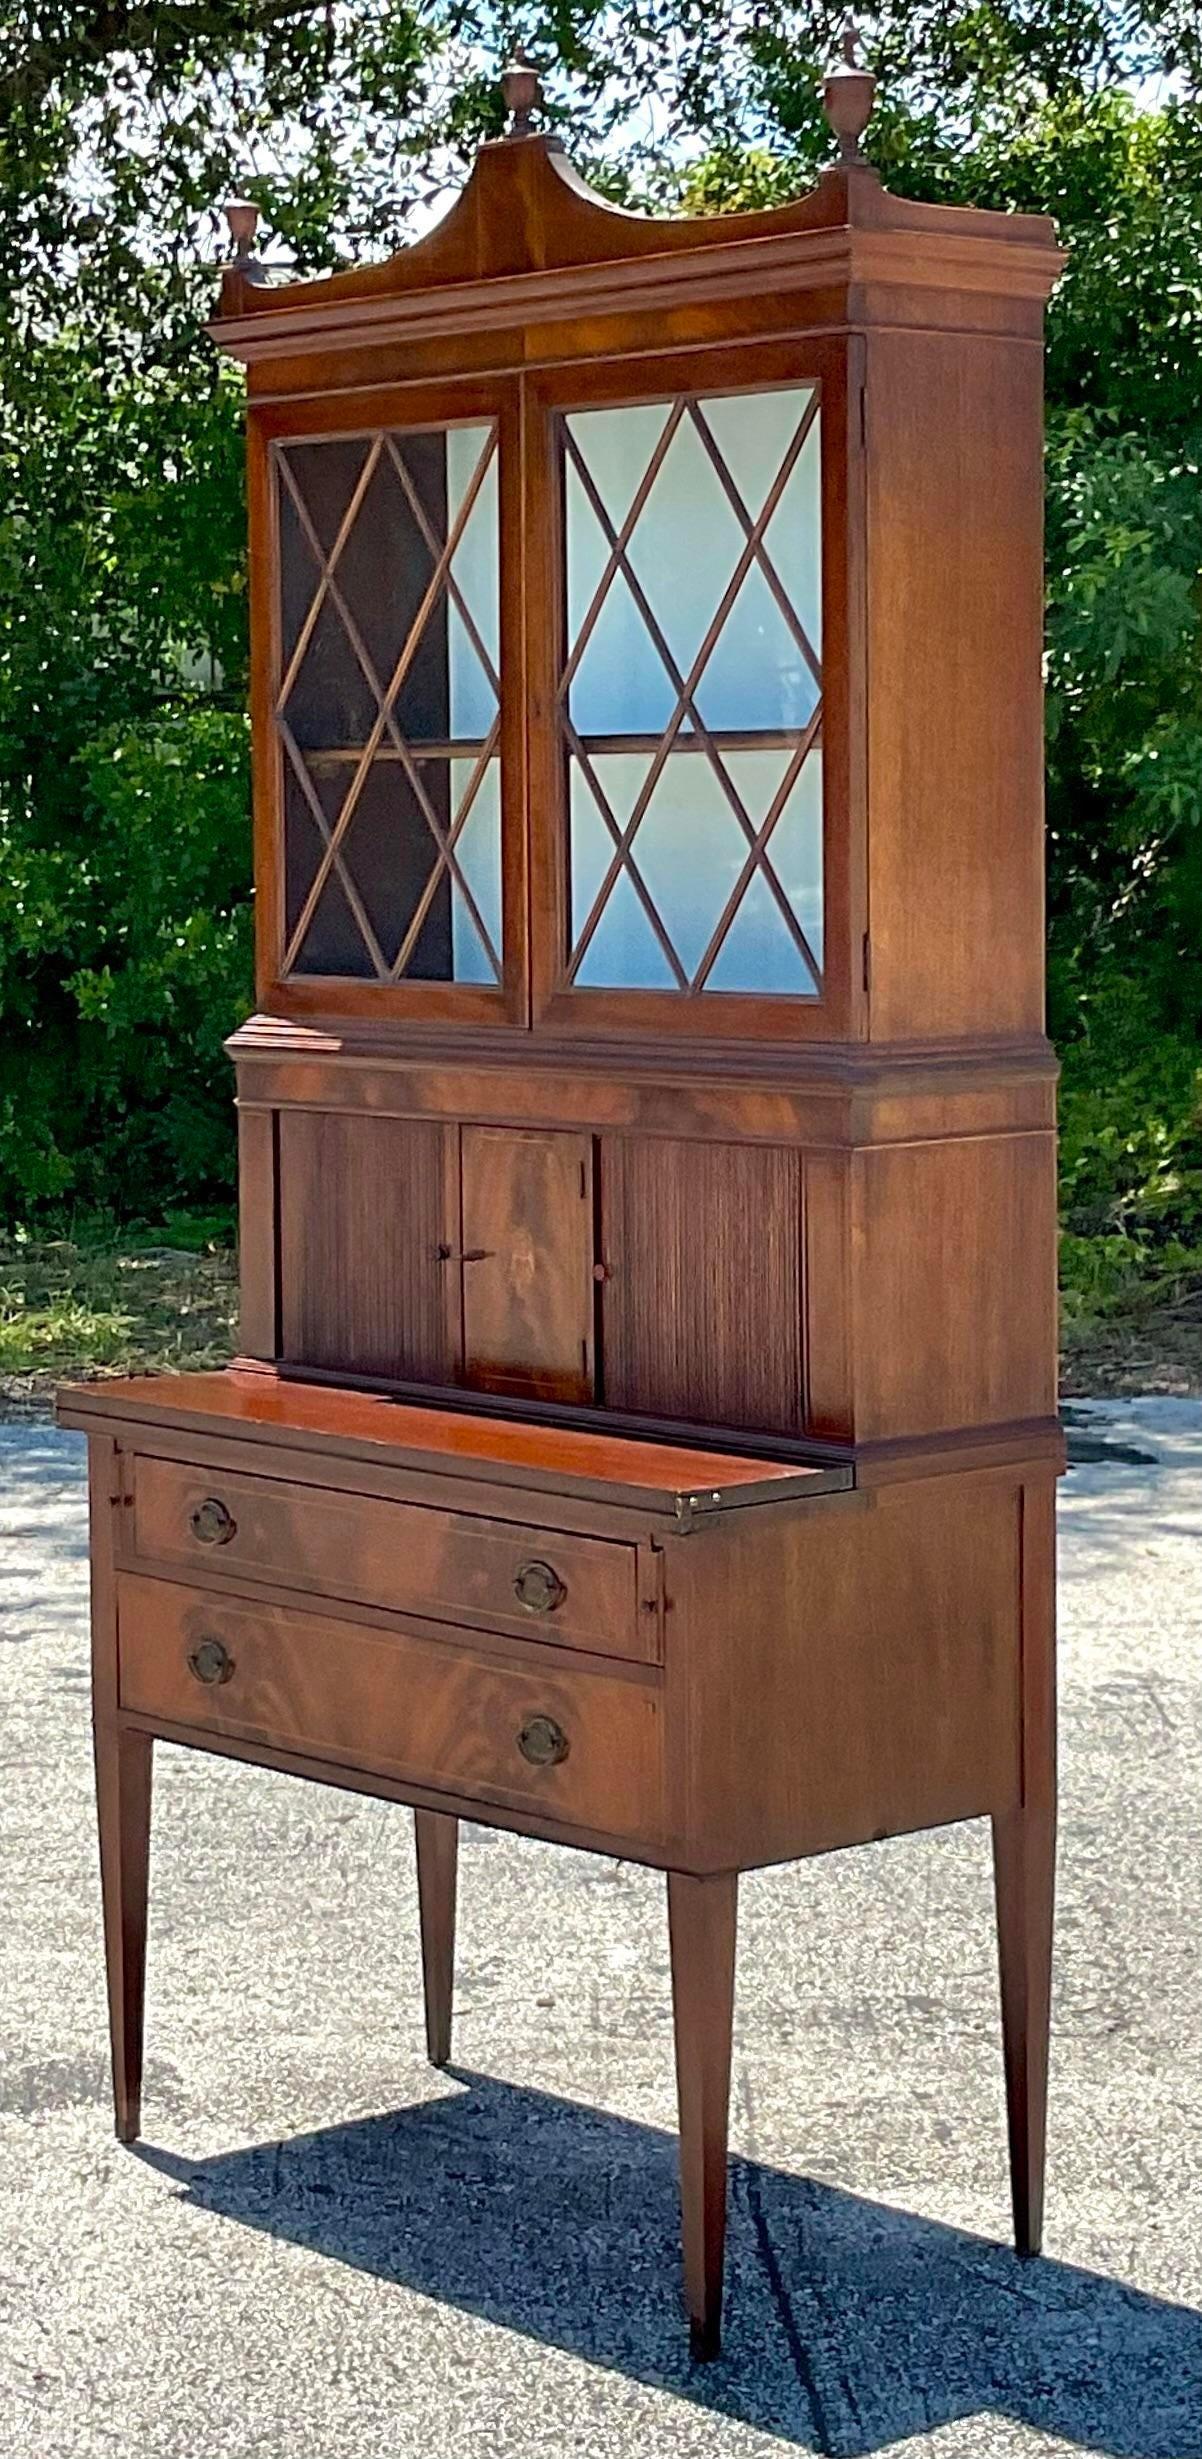 A fabulous vintage Regency Secretary desk. Beautiful flame mahogany cabinet with trellis million glass doors. Lots of great hidden storage and a flip out desktop. Acquired from a Palm Beach estate.

Desk open depth 26.5